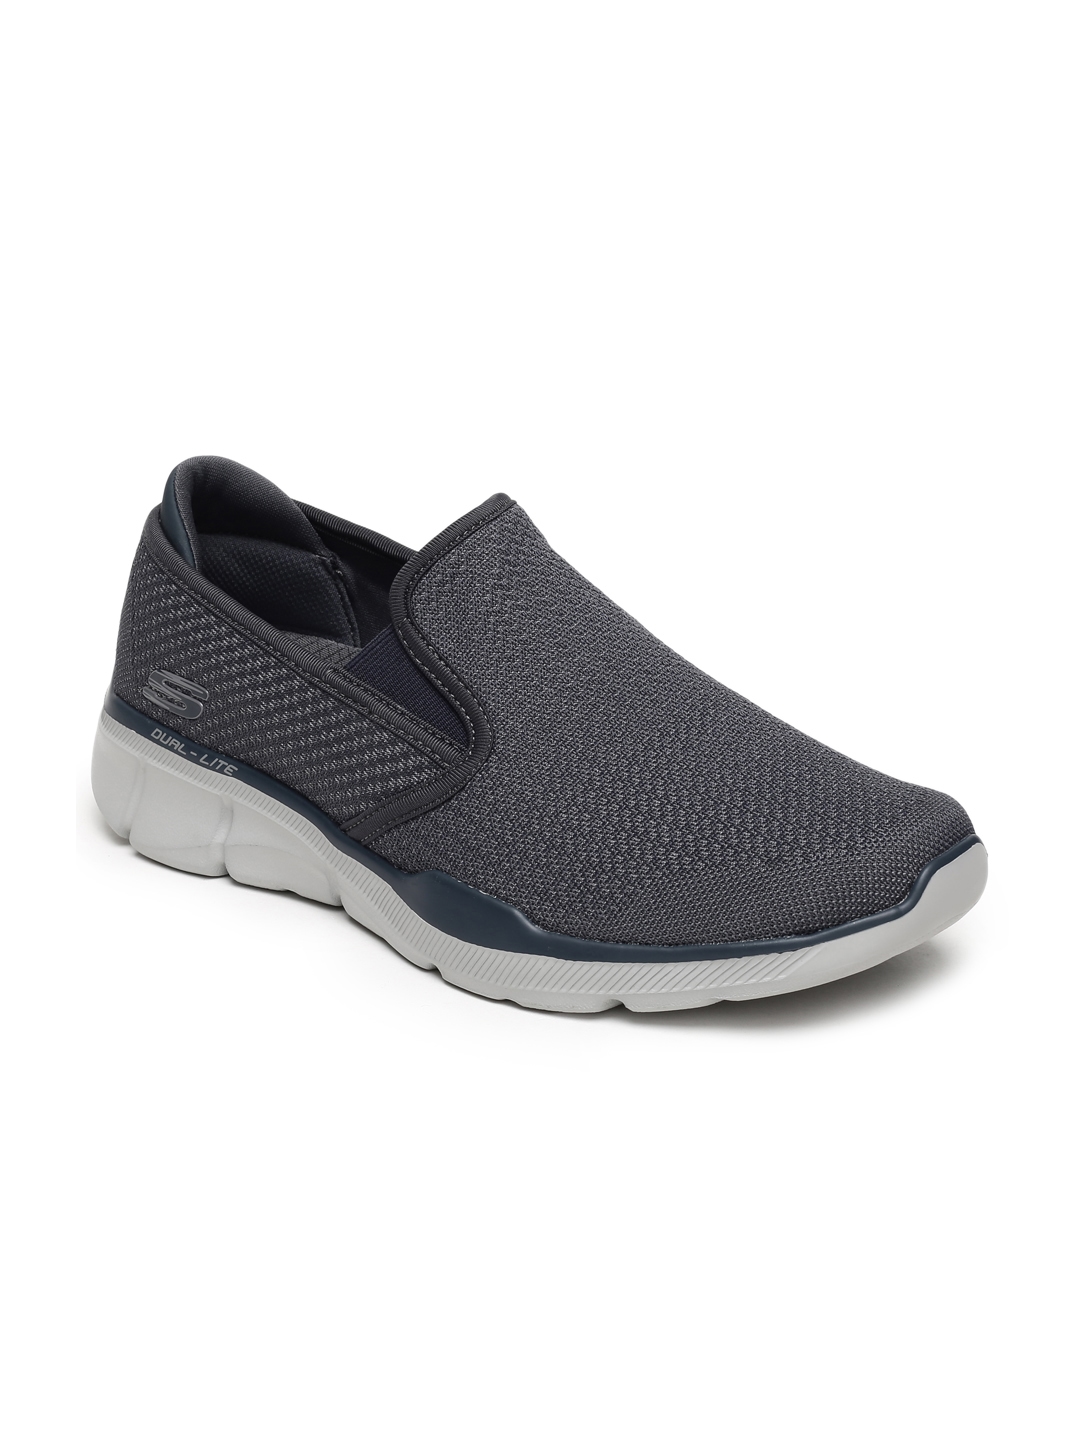 Buy Men Grey 3.0 ASURES Slip On Sneakers - Casual Shoes for | Myntra